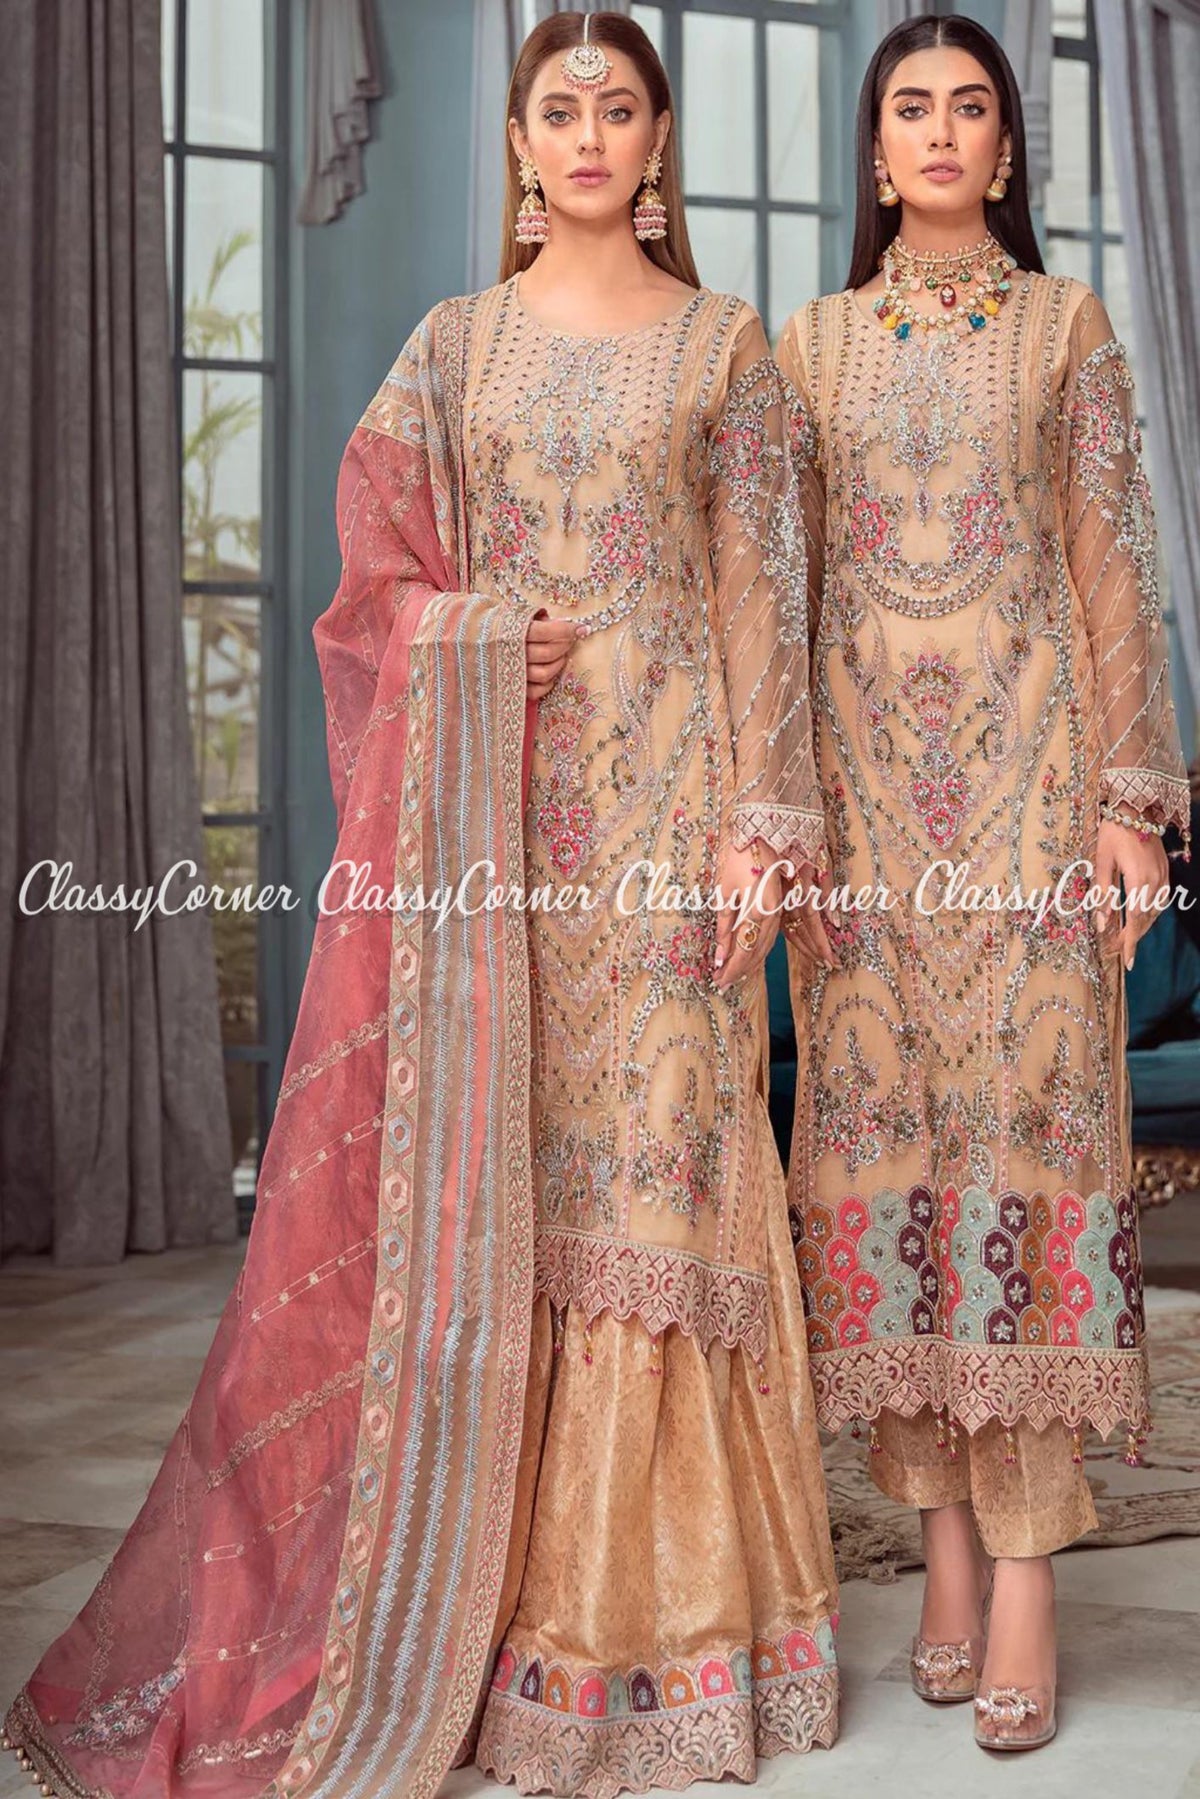 Peach Pink Net Emnroidered Pakistani Outfit